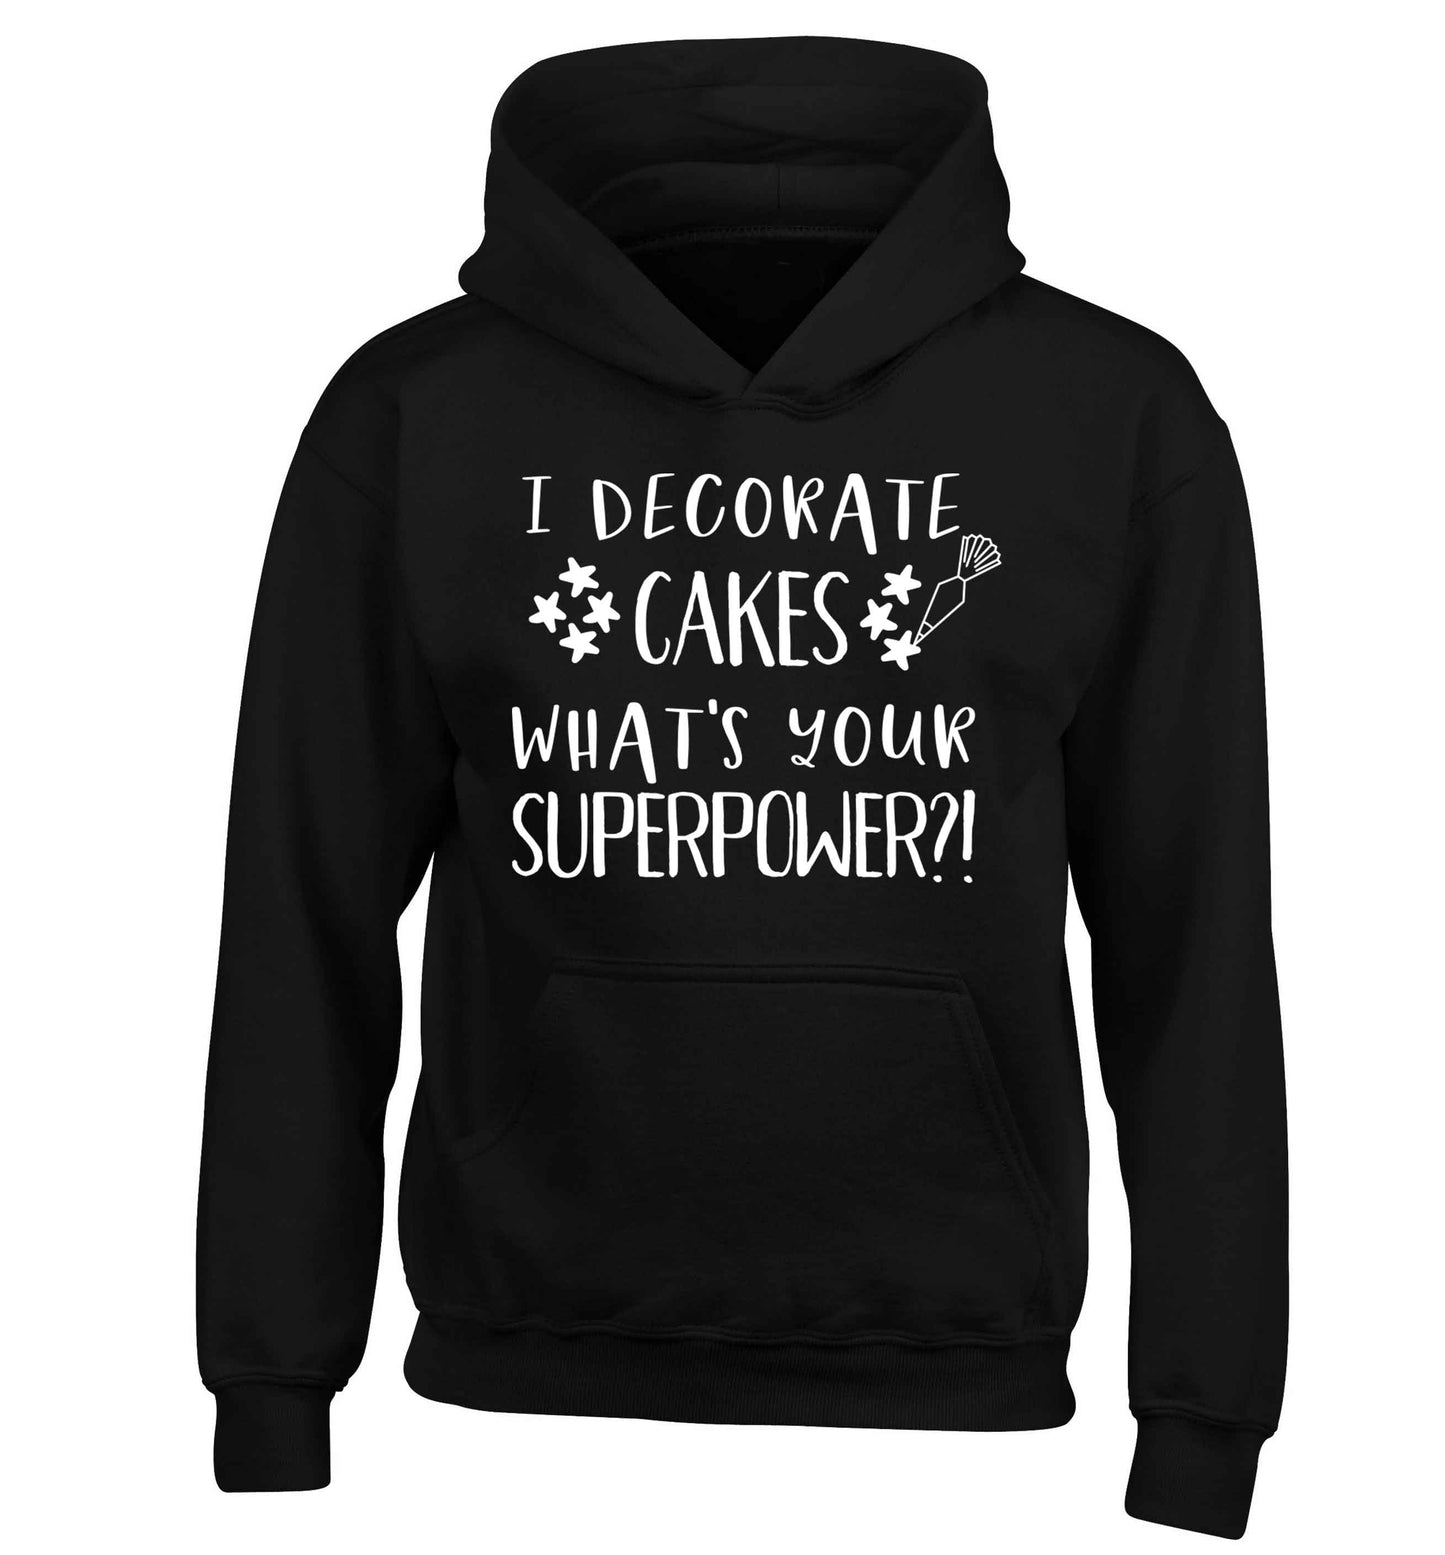 I decorate cakes what's your superpower?! children's black hoodie 12-13 Years